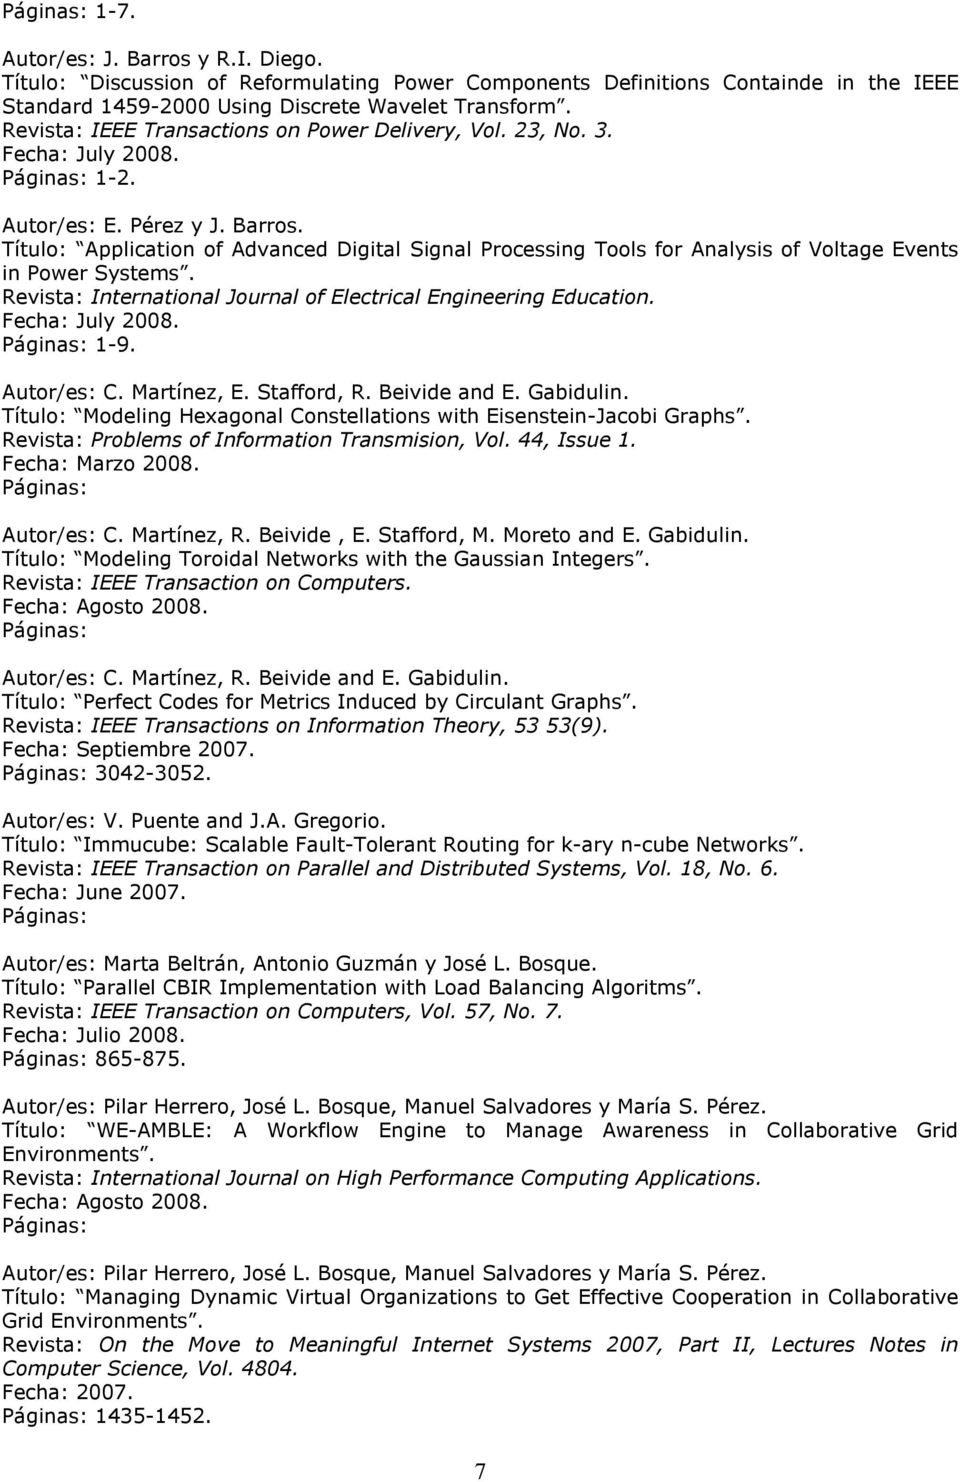 Título: Application of Advanced Digital Signal Processing Tools for Analysis of Voltage Events in Power Systems. Revista: International Journal of Electrical Engineering Education. Fecha: July 2008.